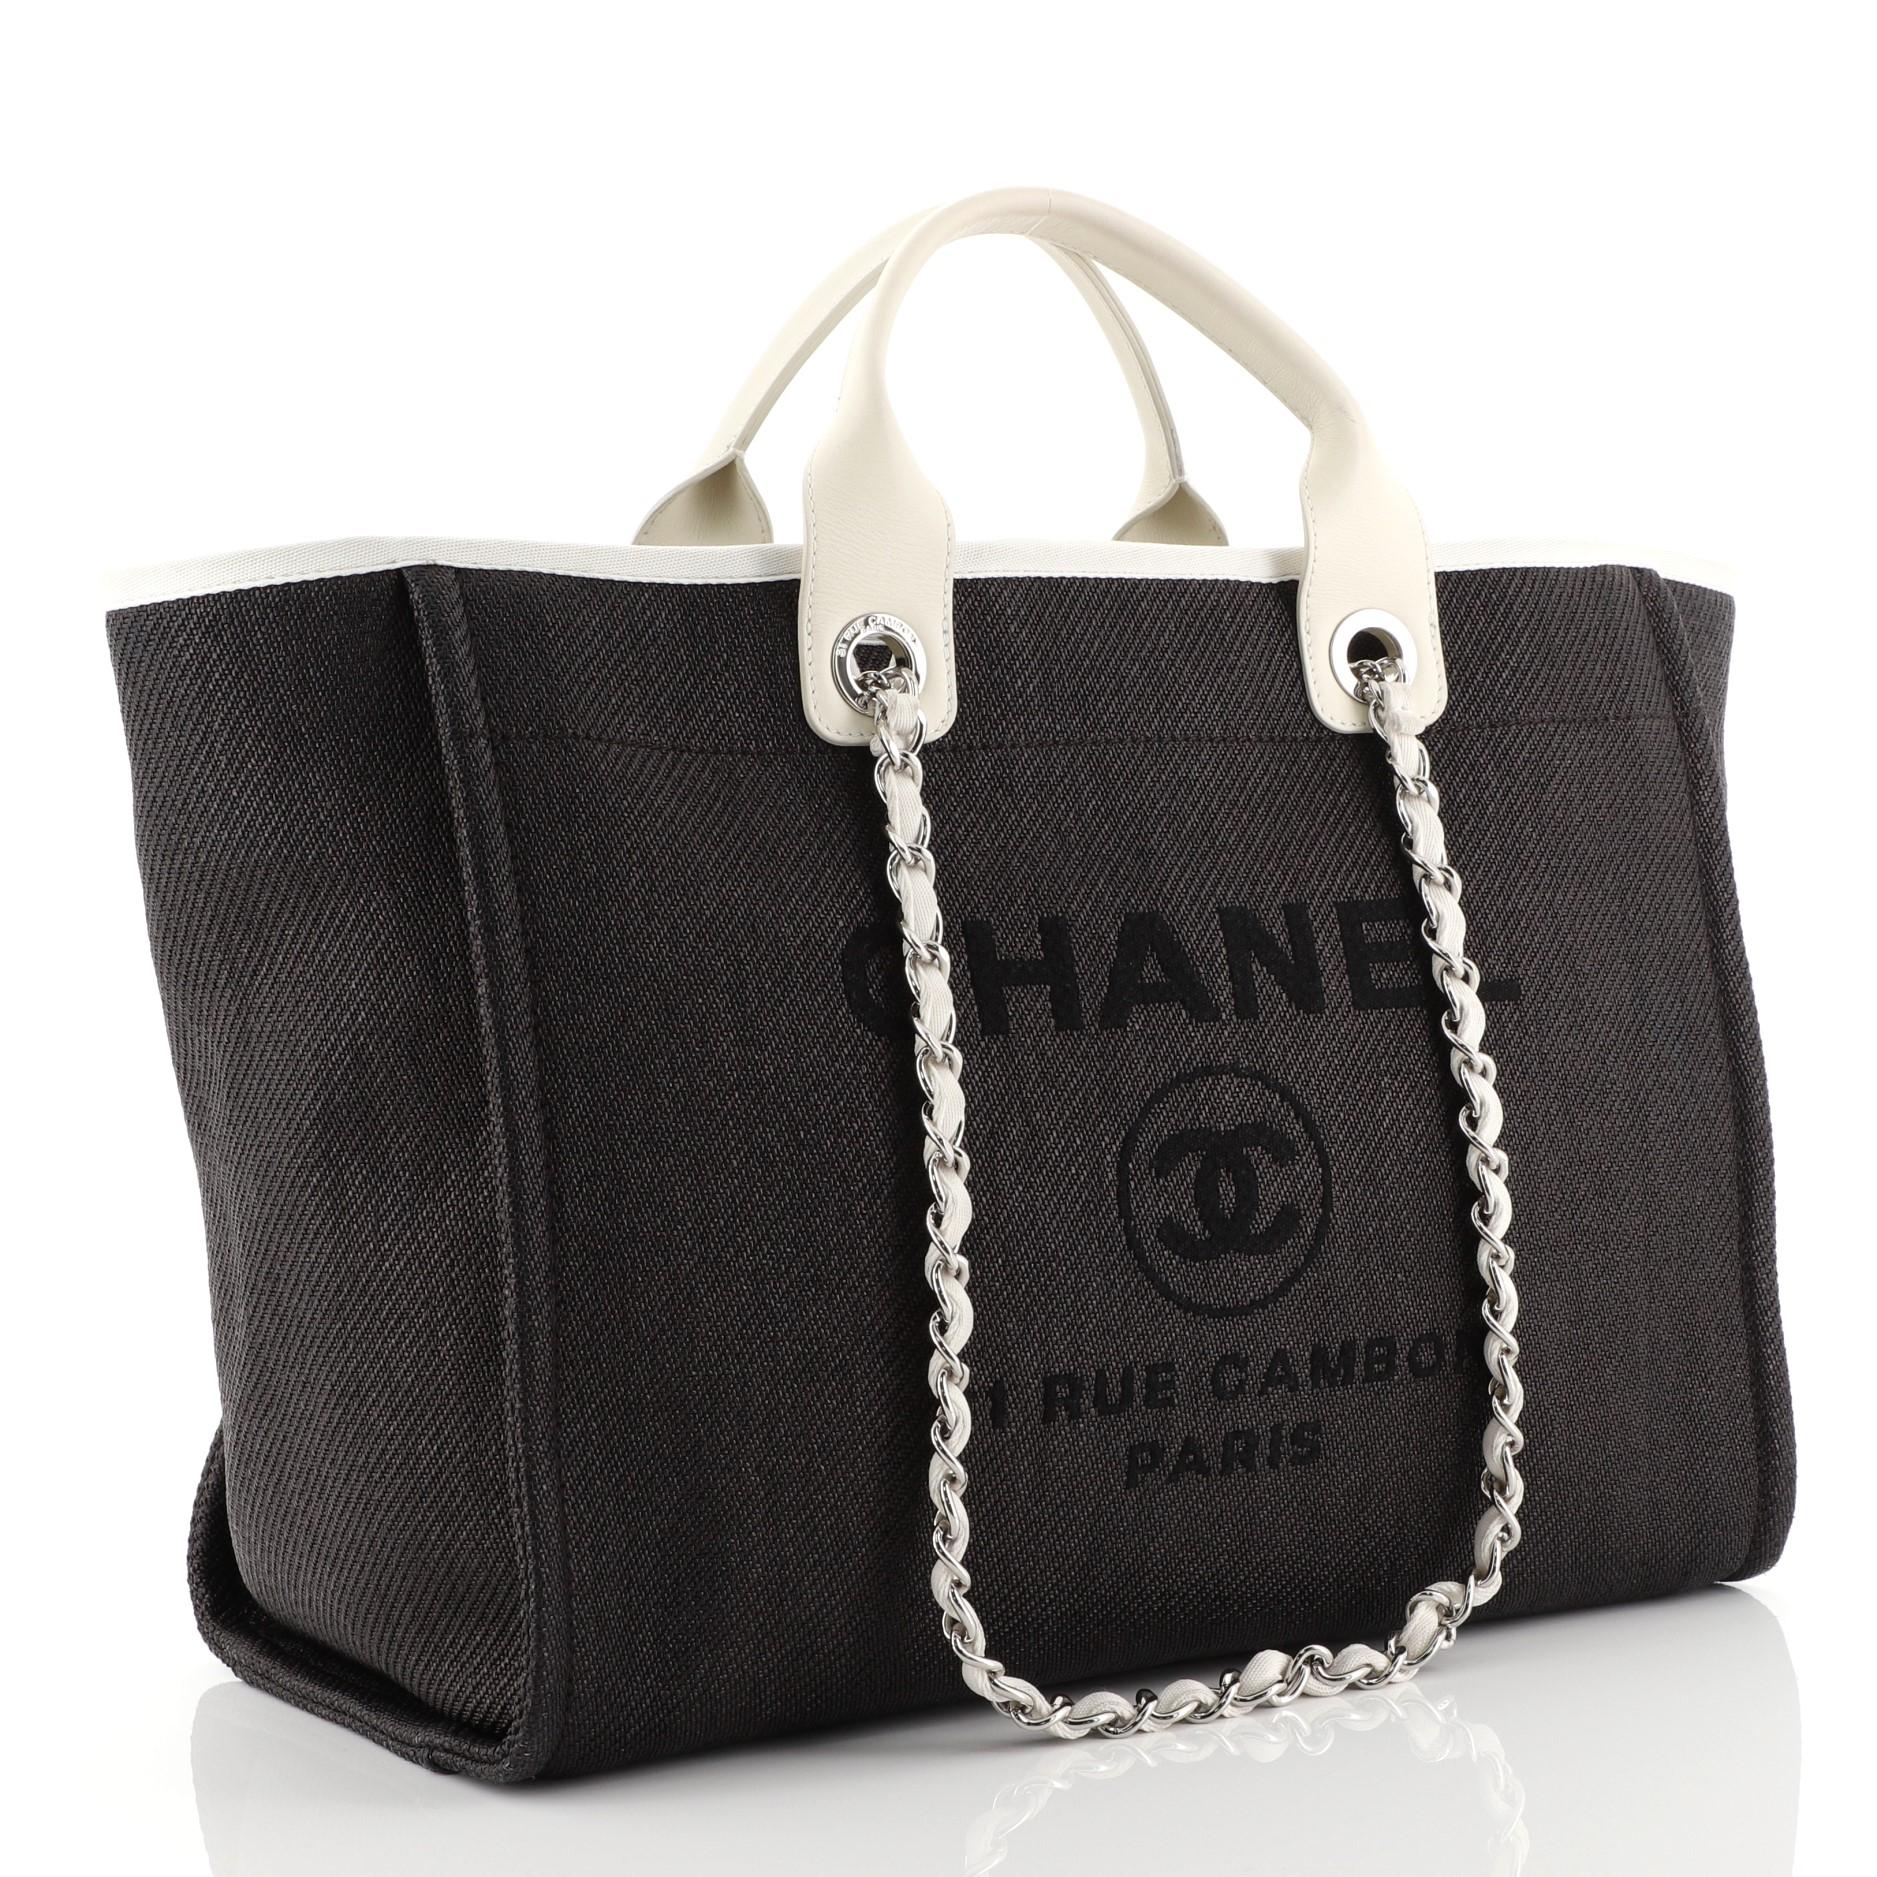 This Chanel Deauville Tote Raffia Large, crafted from black raffia, features dual leather handles, woven-in canvas chain straps, and silver-tone hardware. Its magnetic snap closure opens to a black fabric interior with slip and zip pockets. Hologram